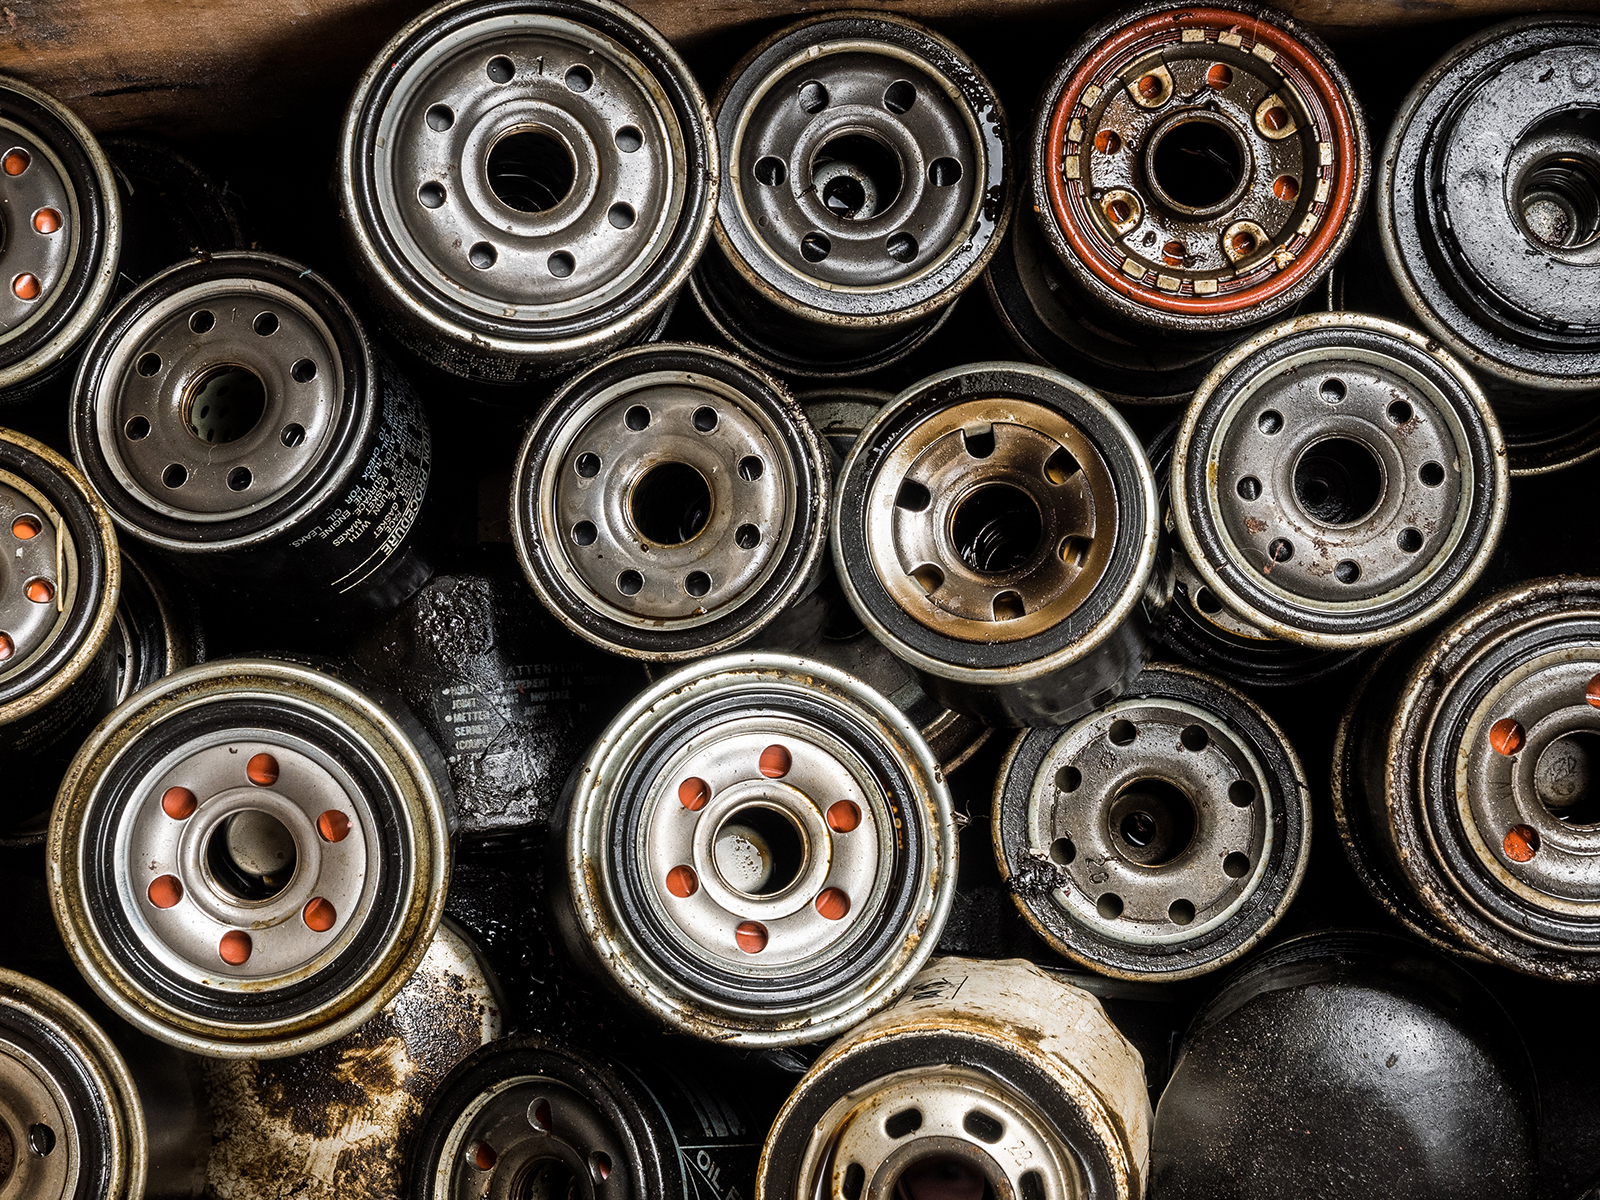 Our auto recyclers take oil filters and batteries